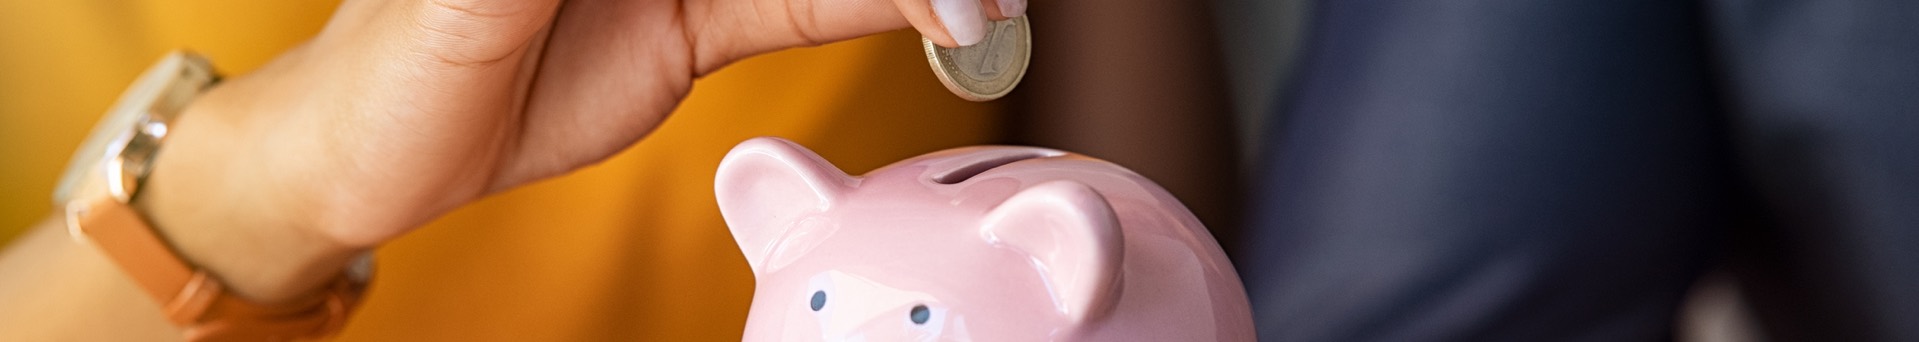 Image of a person adding money to a piggy bank